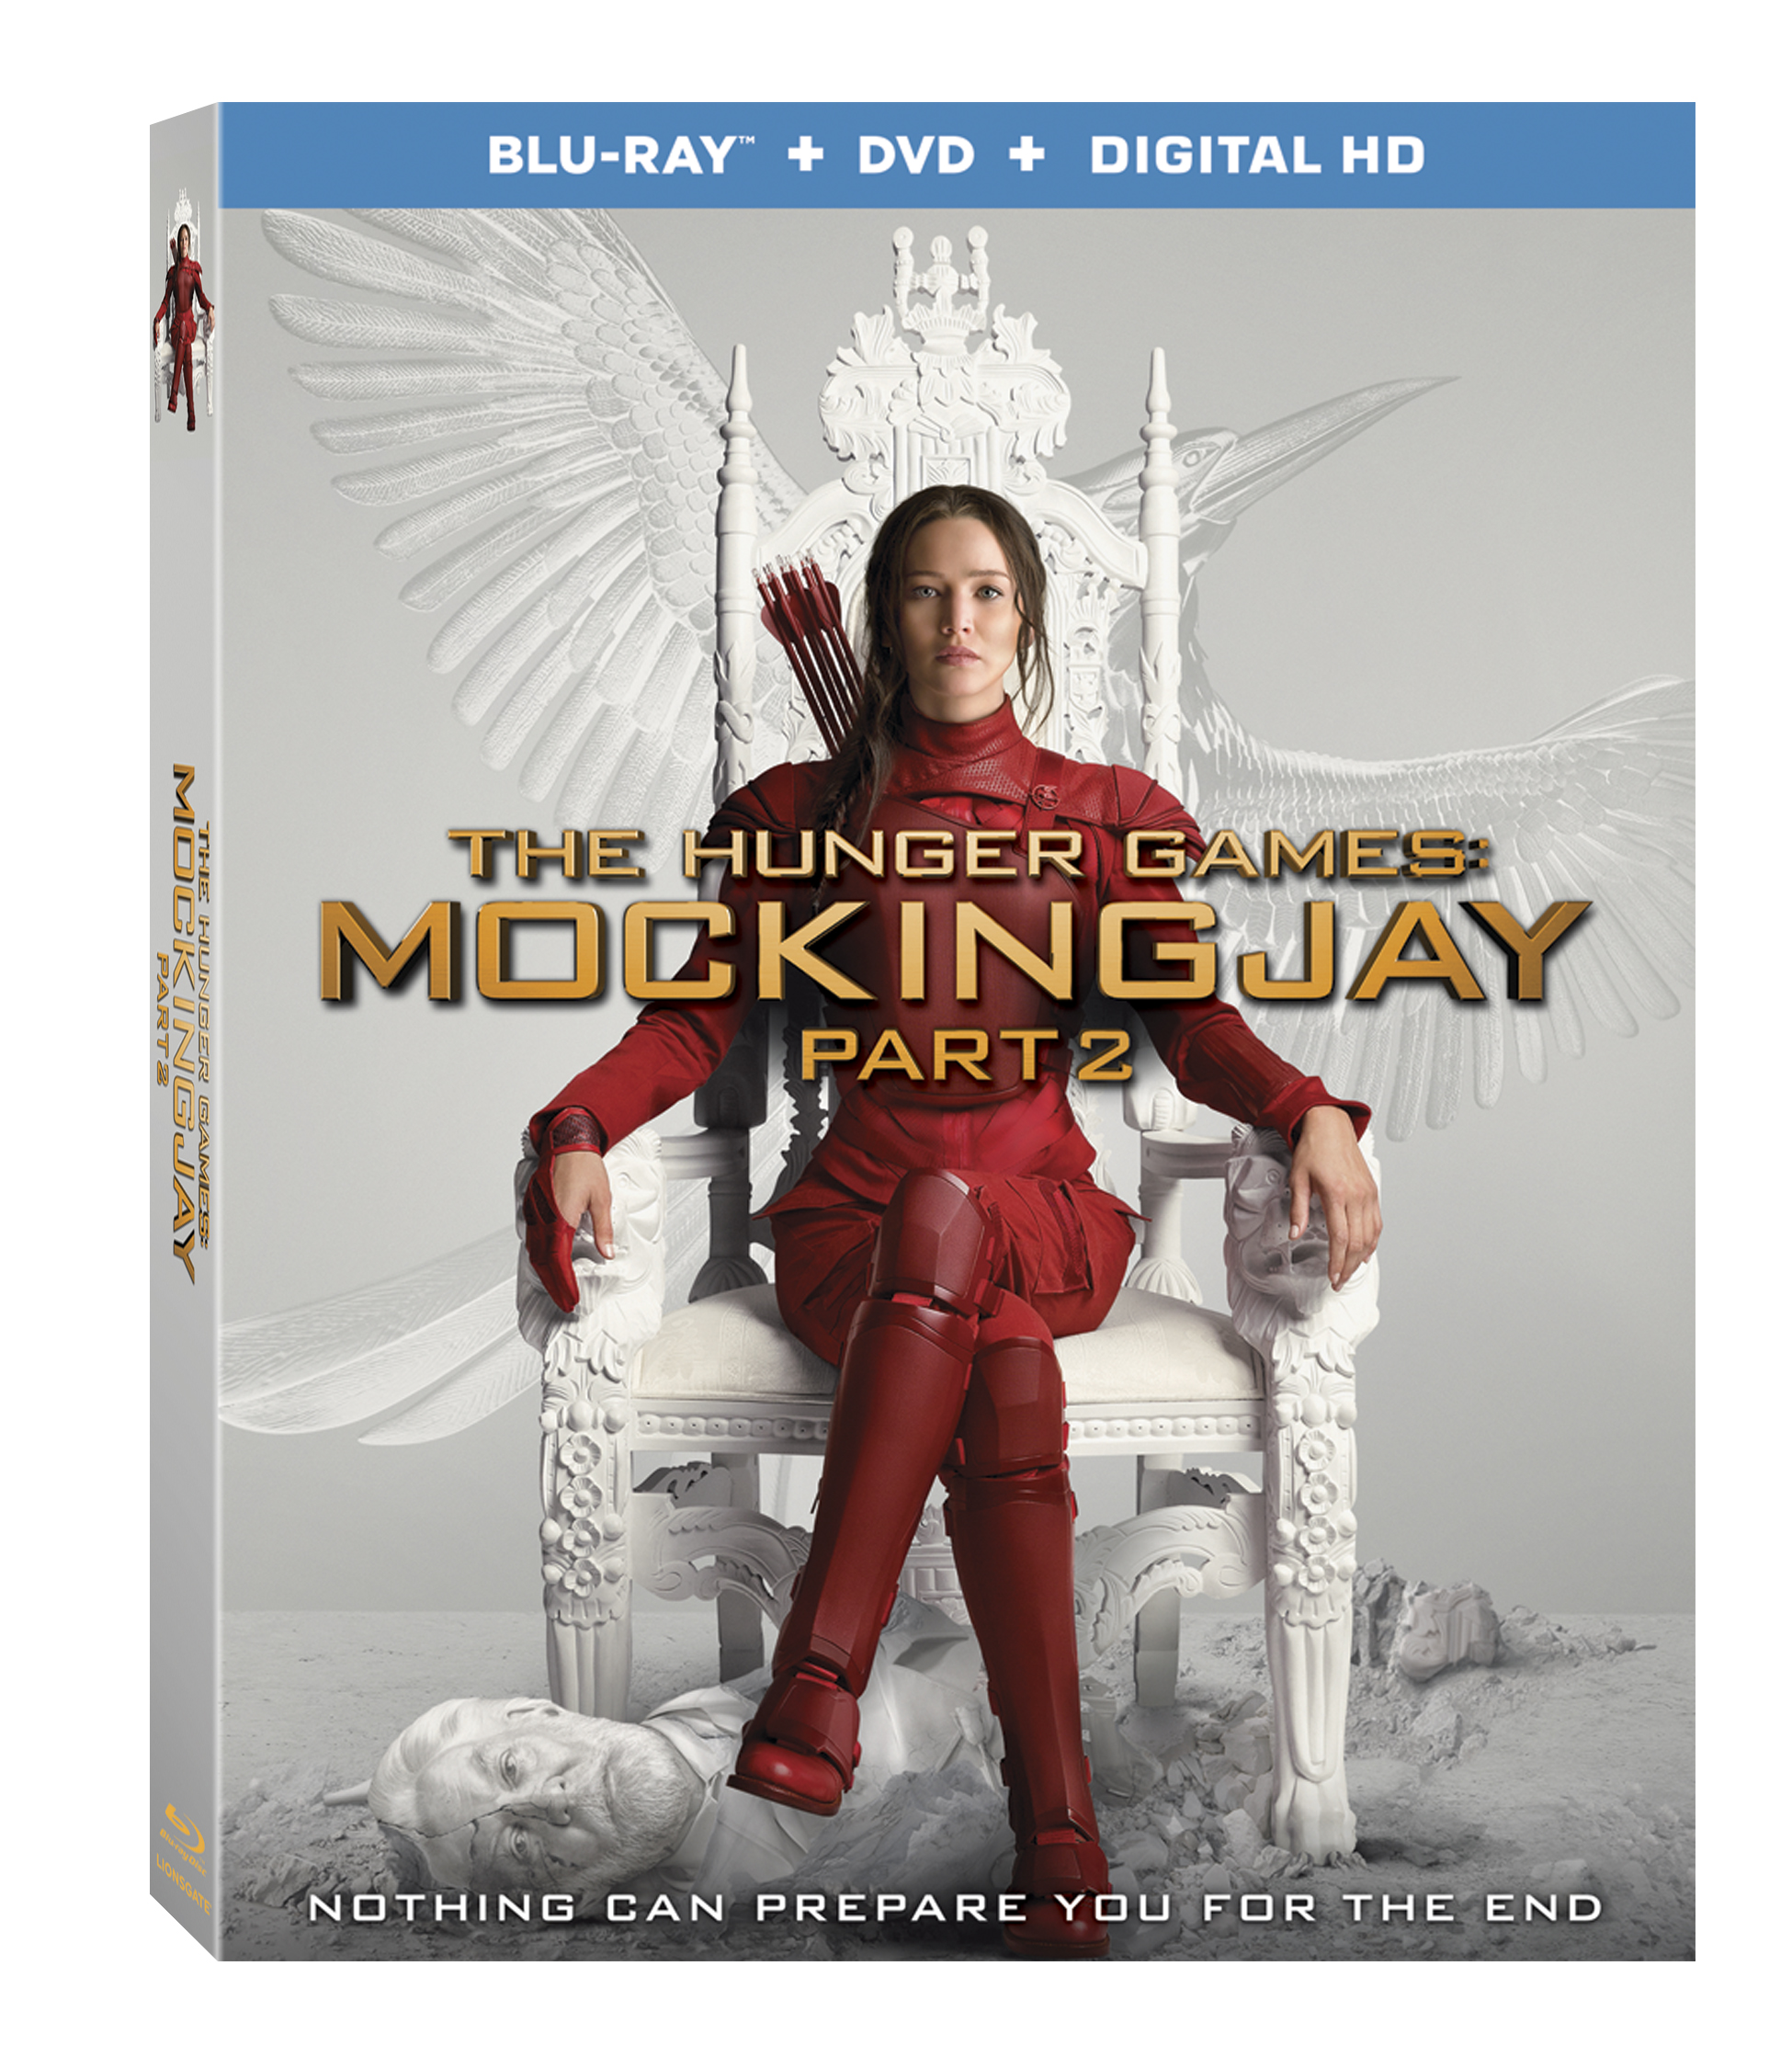 The Hunger Games Mockingjay Part 2 Release Date Announced for Blu-ray/DVD/Digital HD